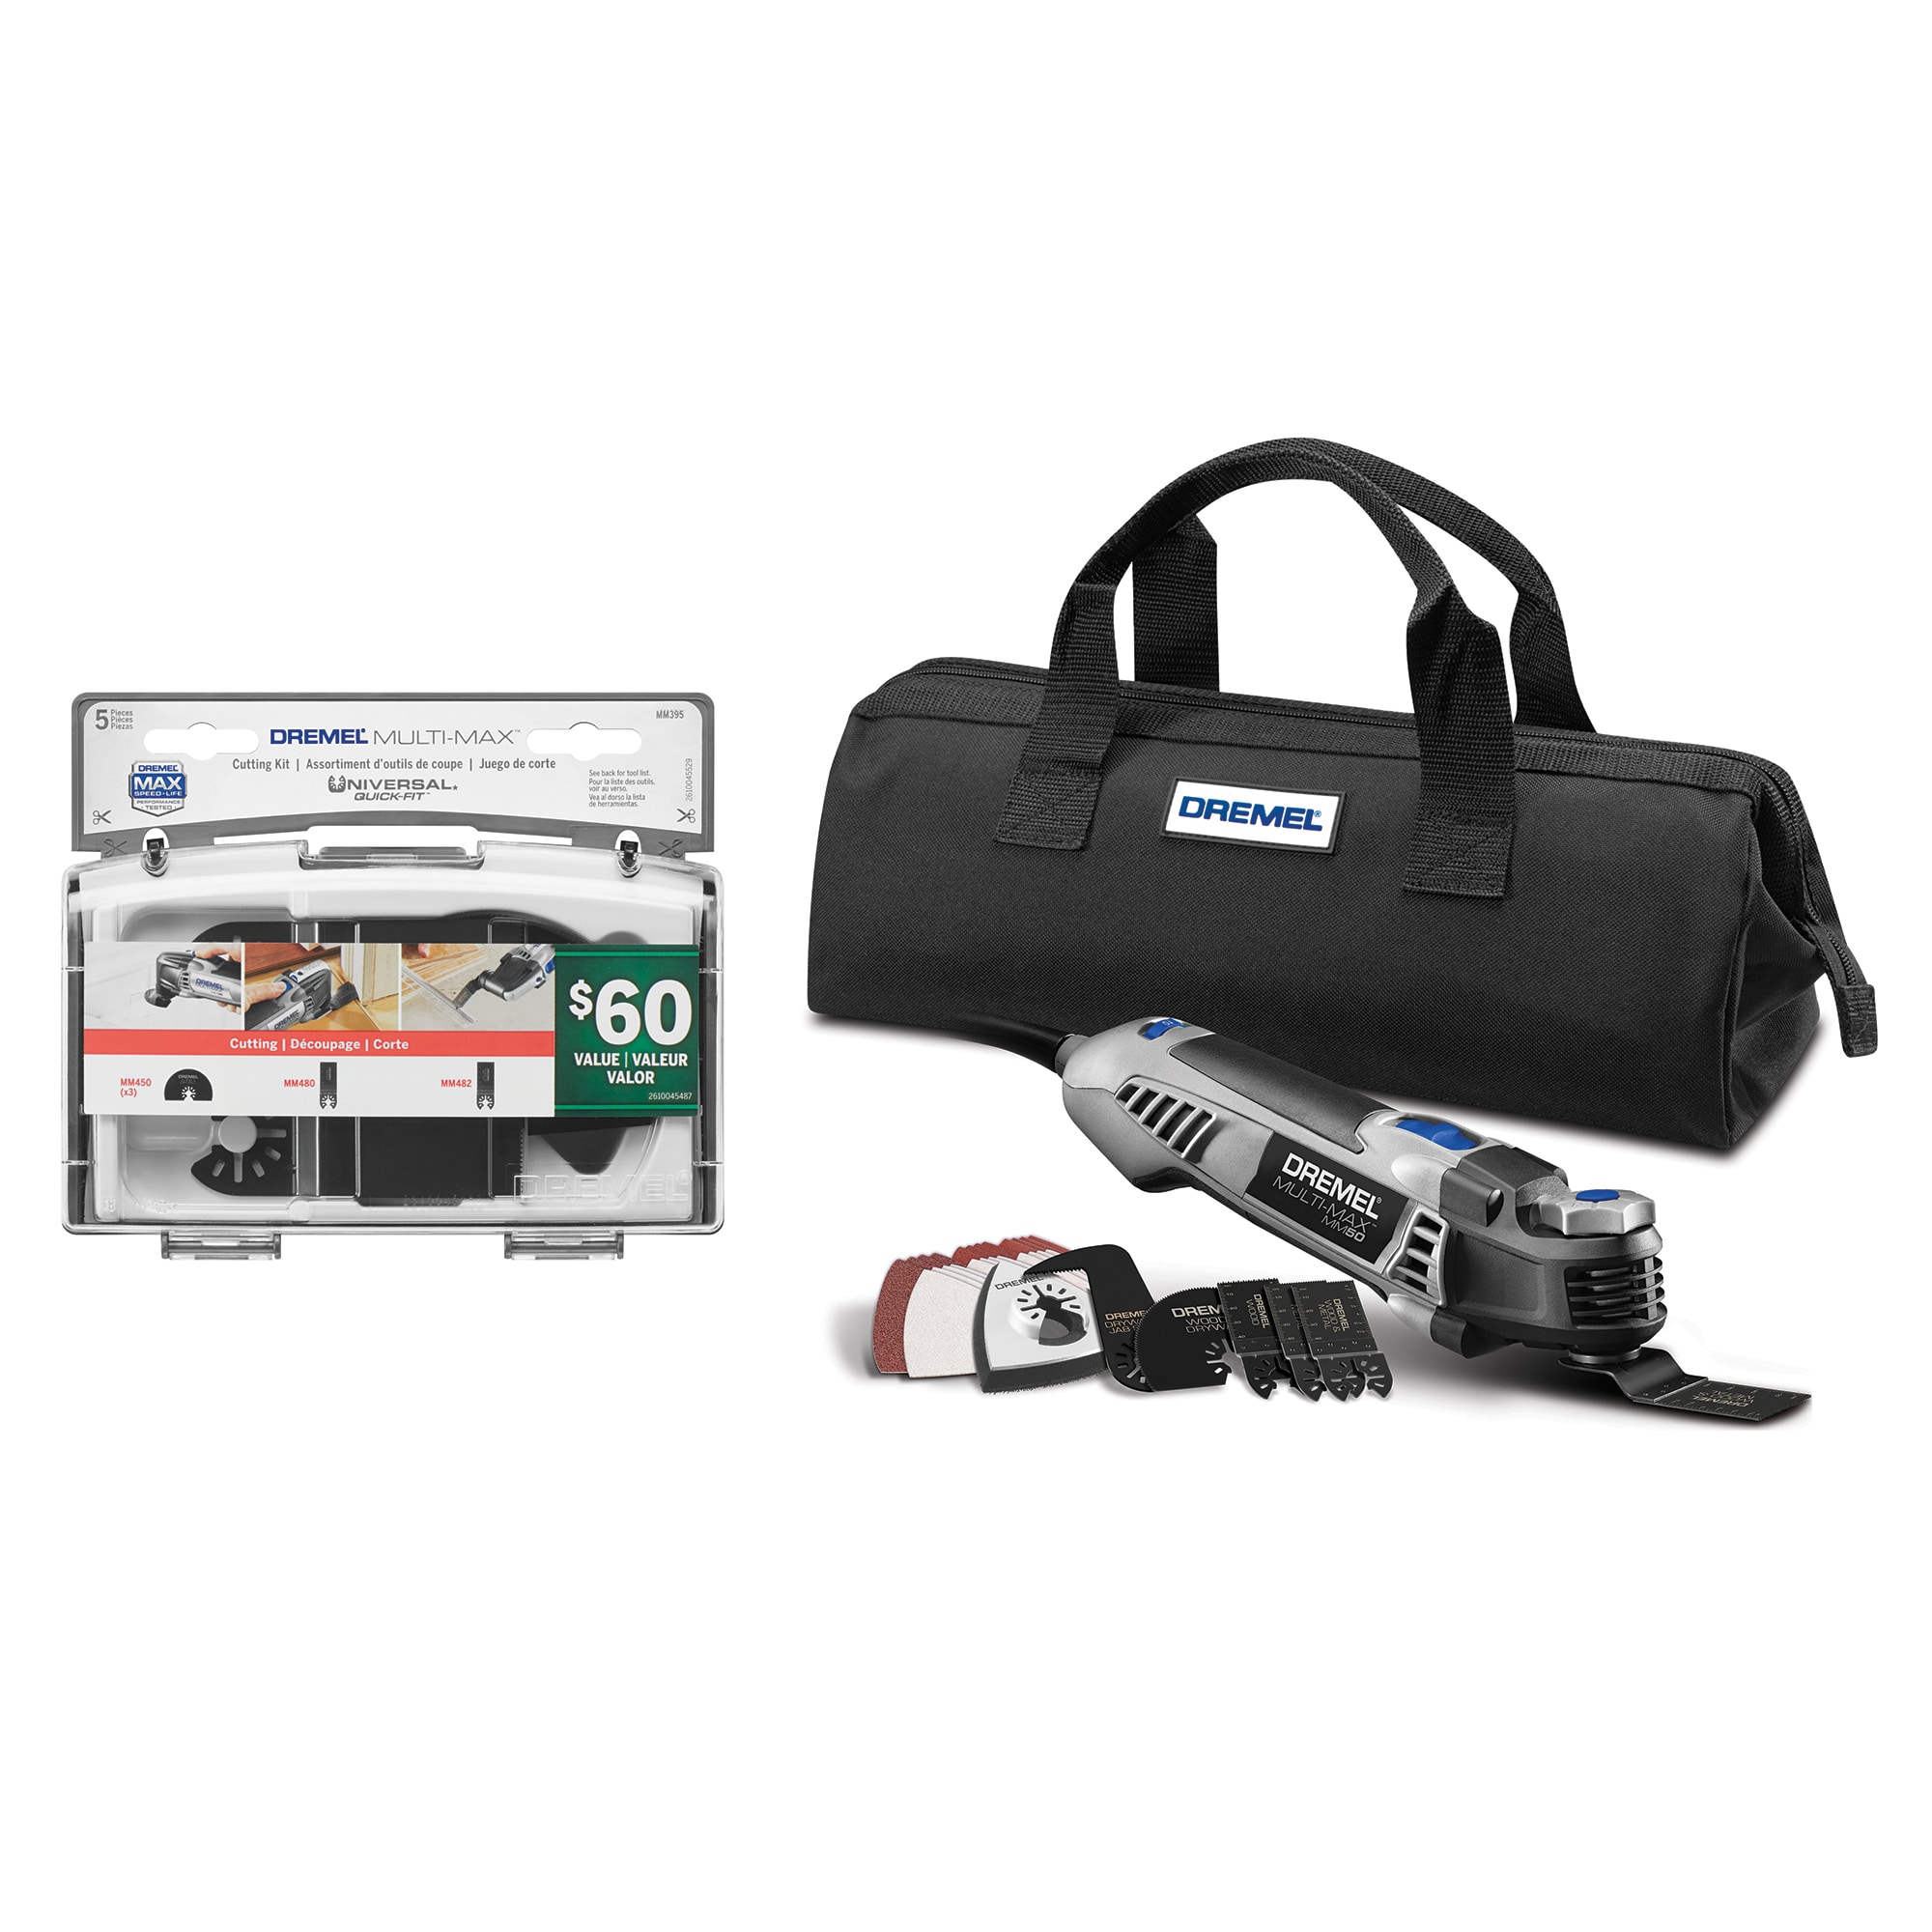 Dremel Multi-Max Corded 5 Amp Variable Speed Oscillating Multi-Tool Kit with 30 Accessories + 5-Piece Blade Set